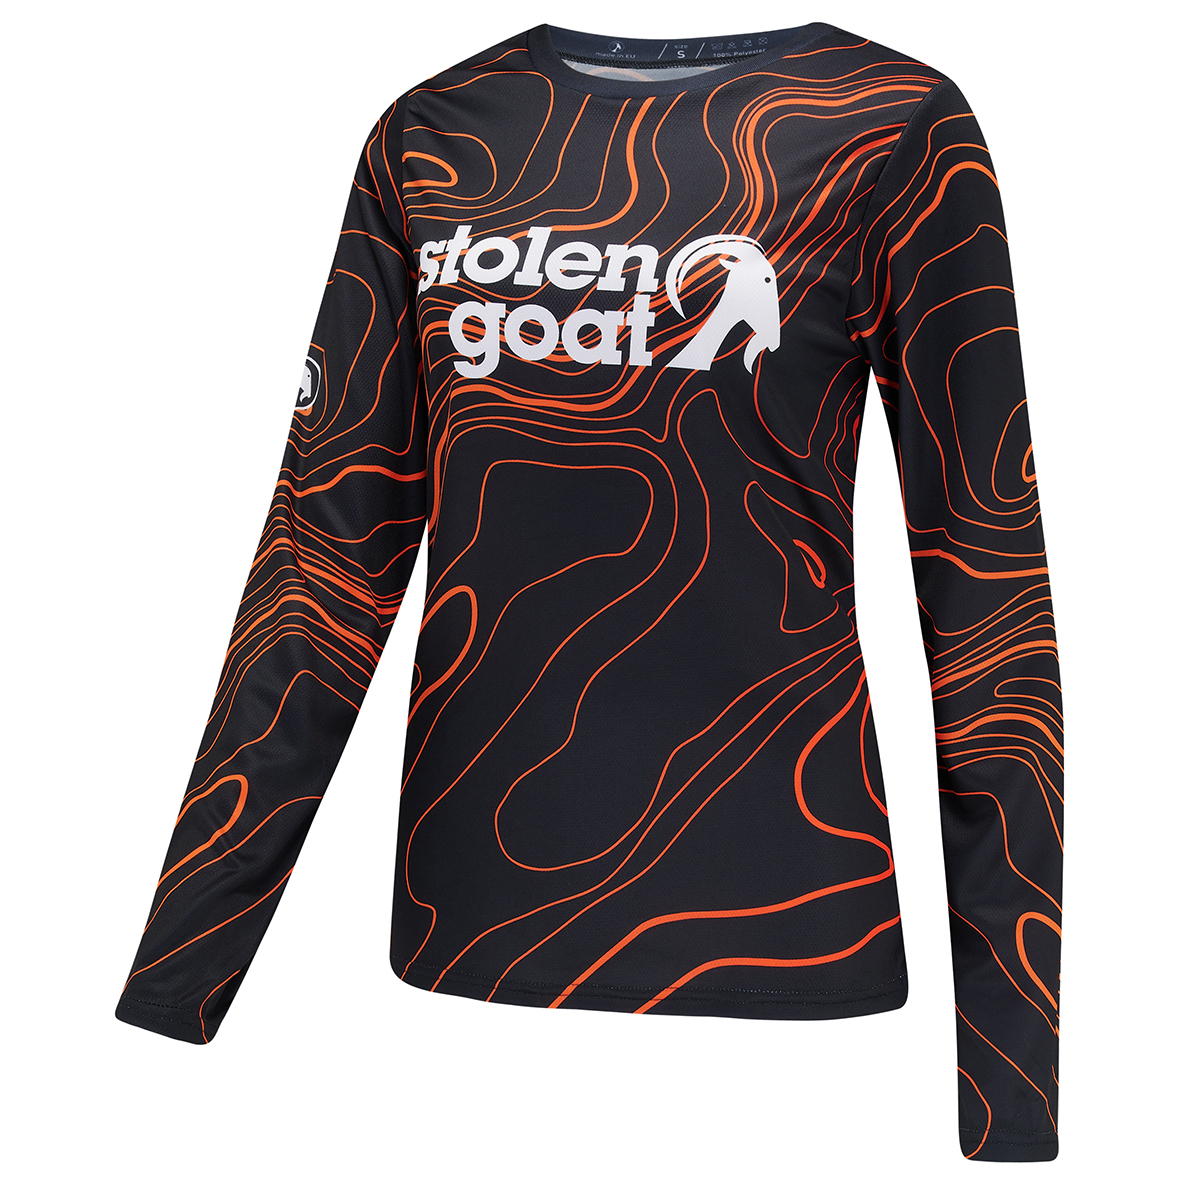 Stolen Goat women's Topo mountain bike jersey black long-sleeved jersey with orange topographical design and white central stolen goat logo